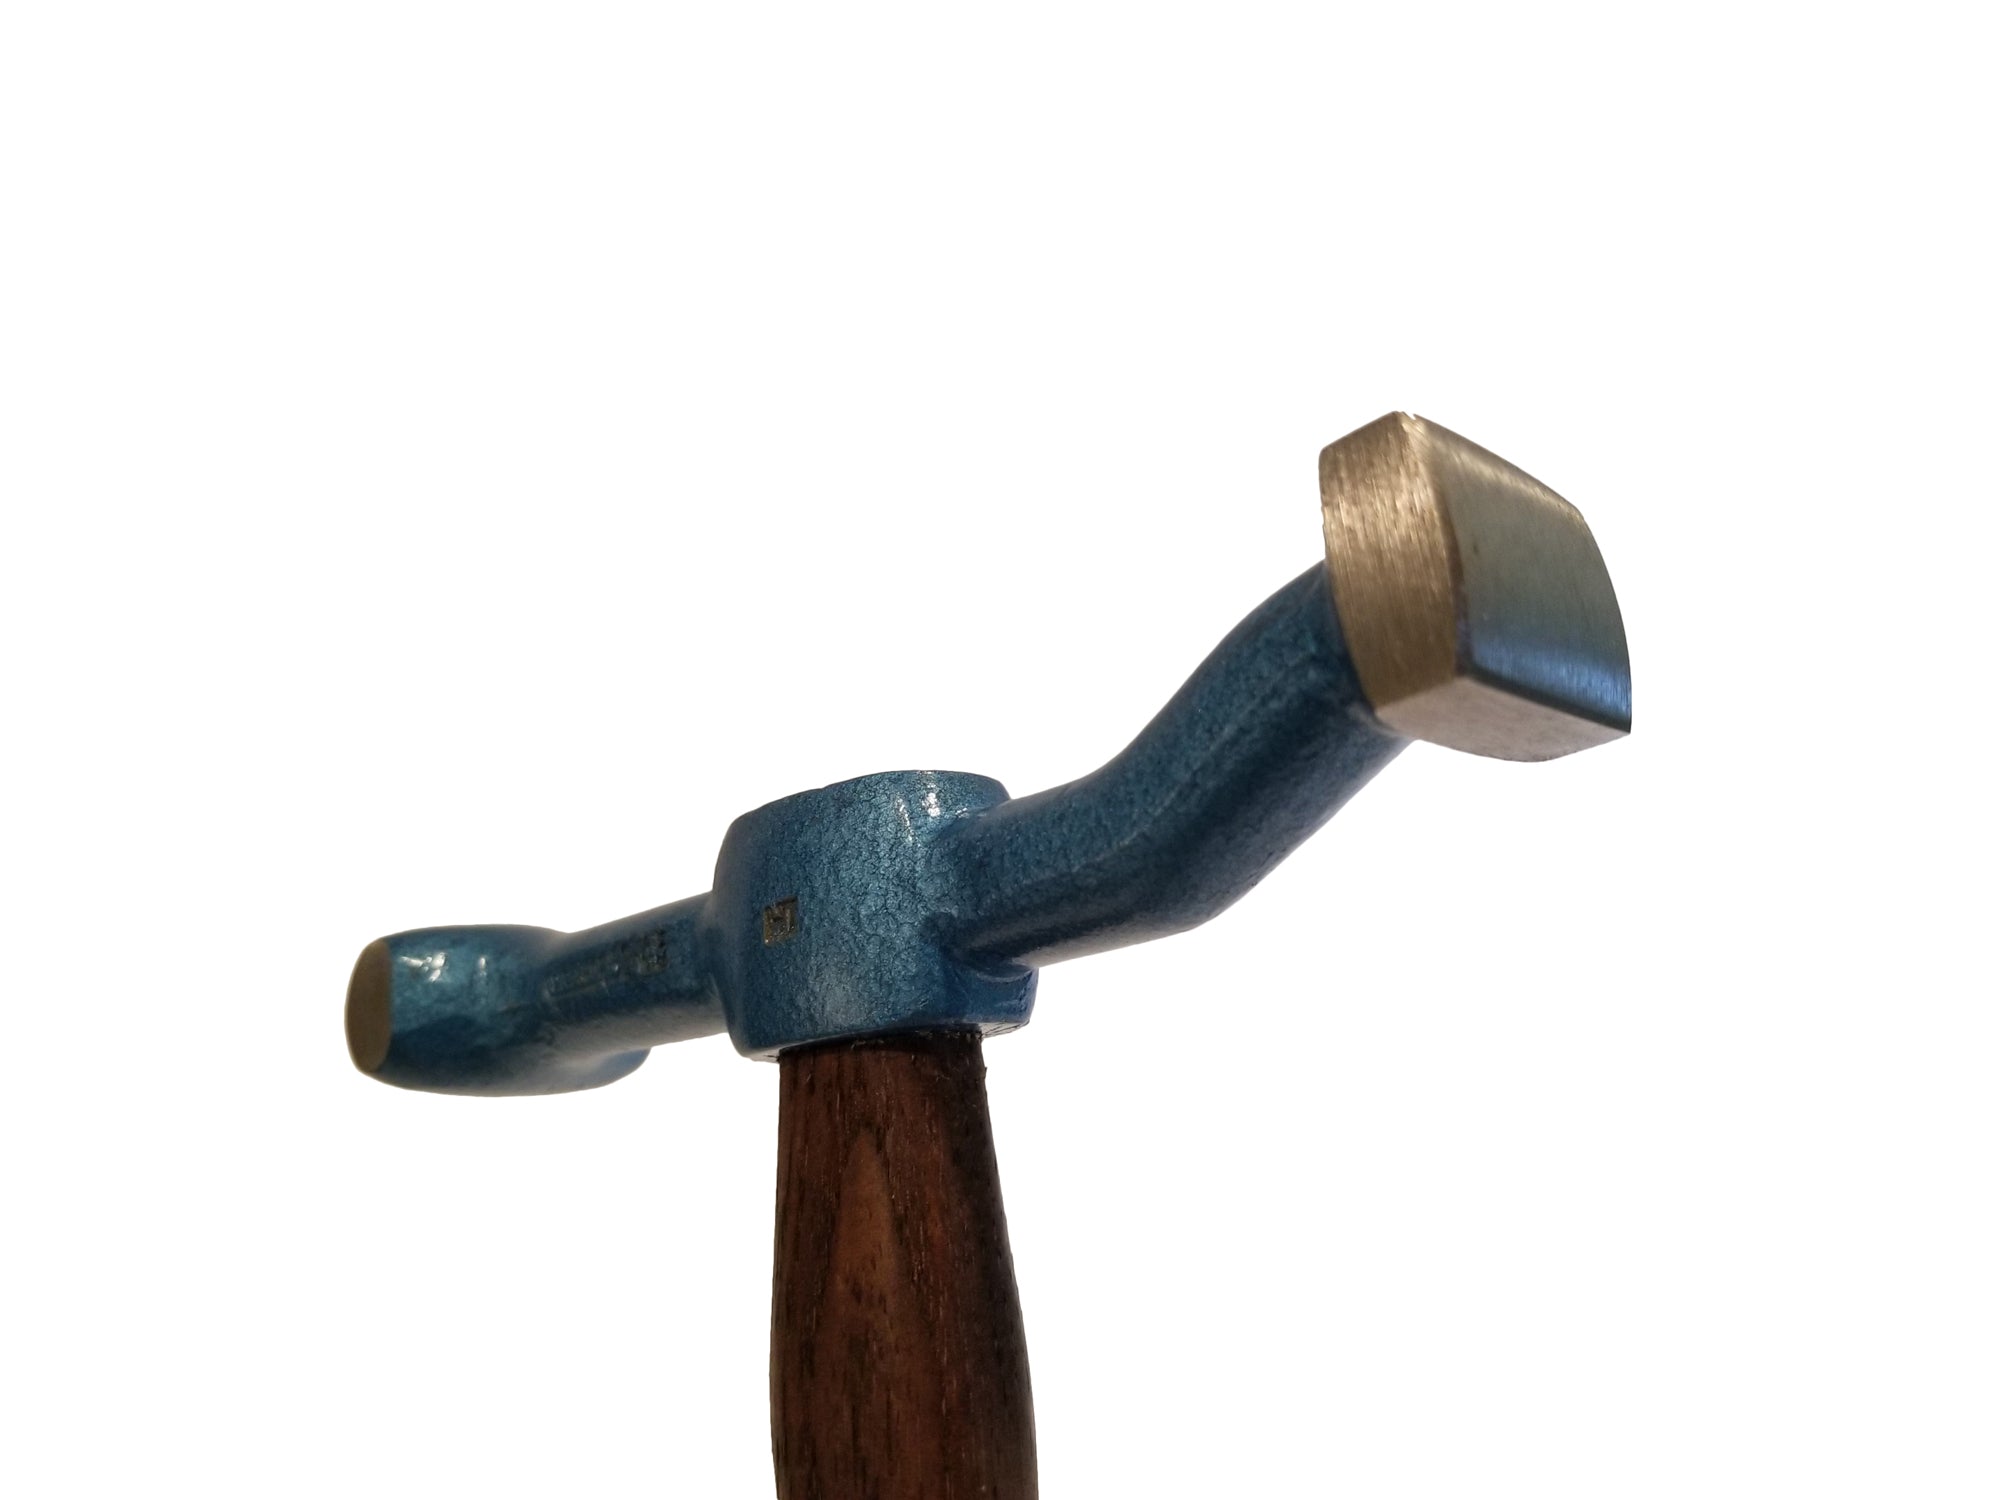 Picard 5402 Autobody and Planishing Hammer with Hickory Handle, 330g